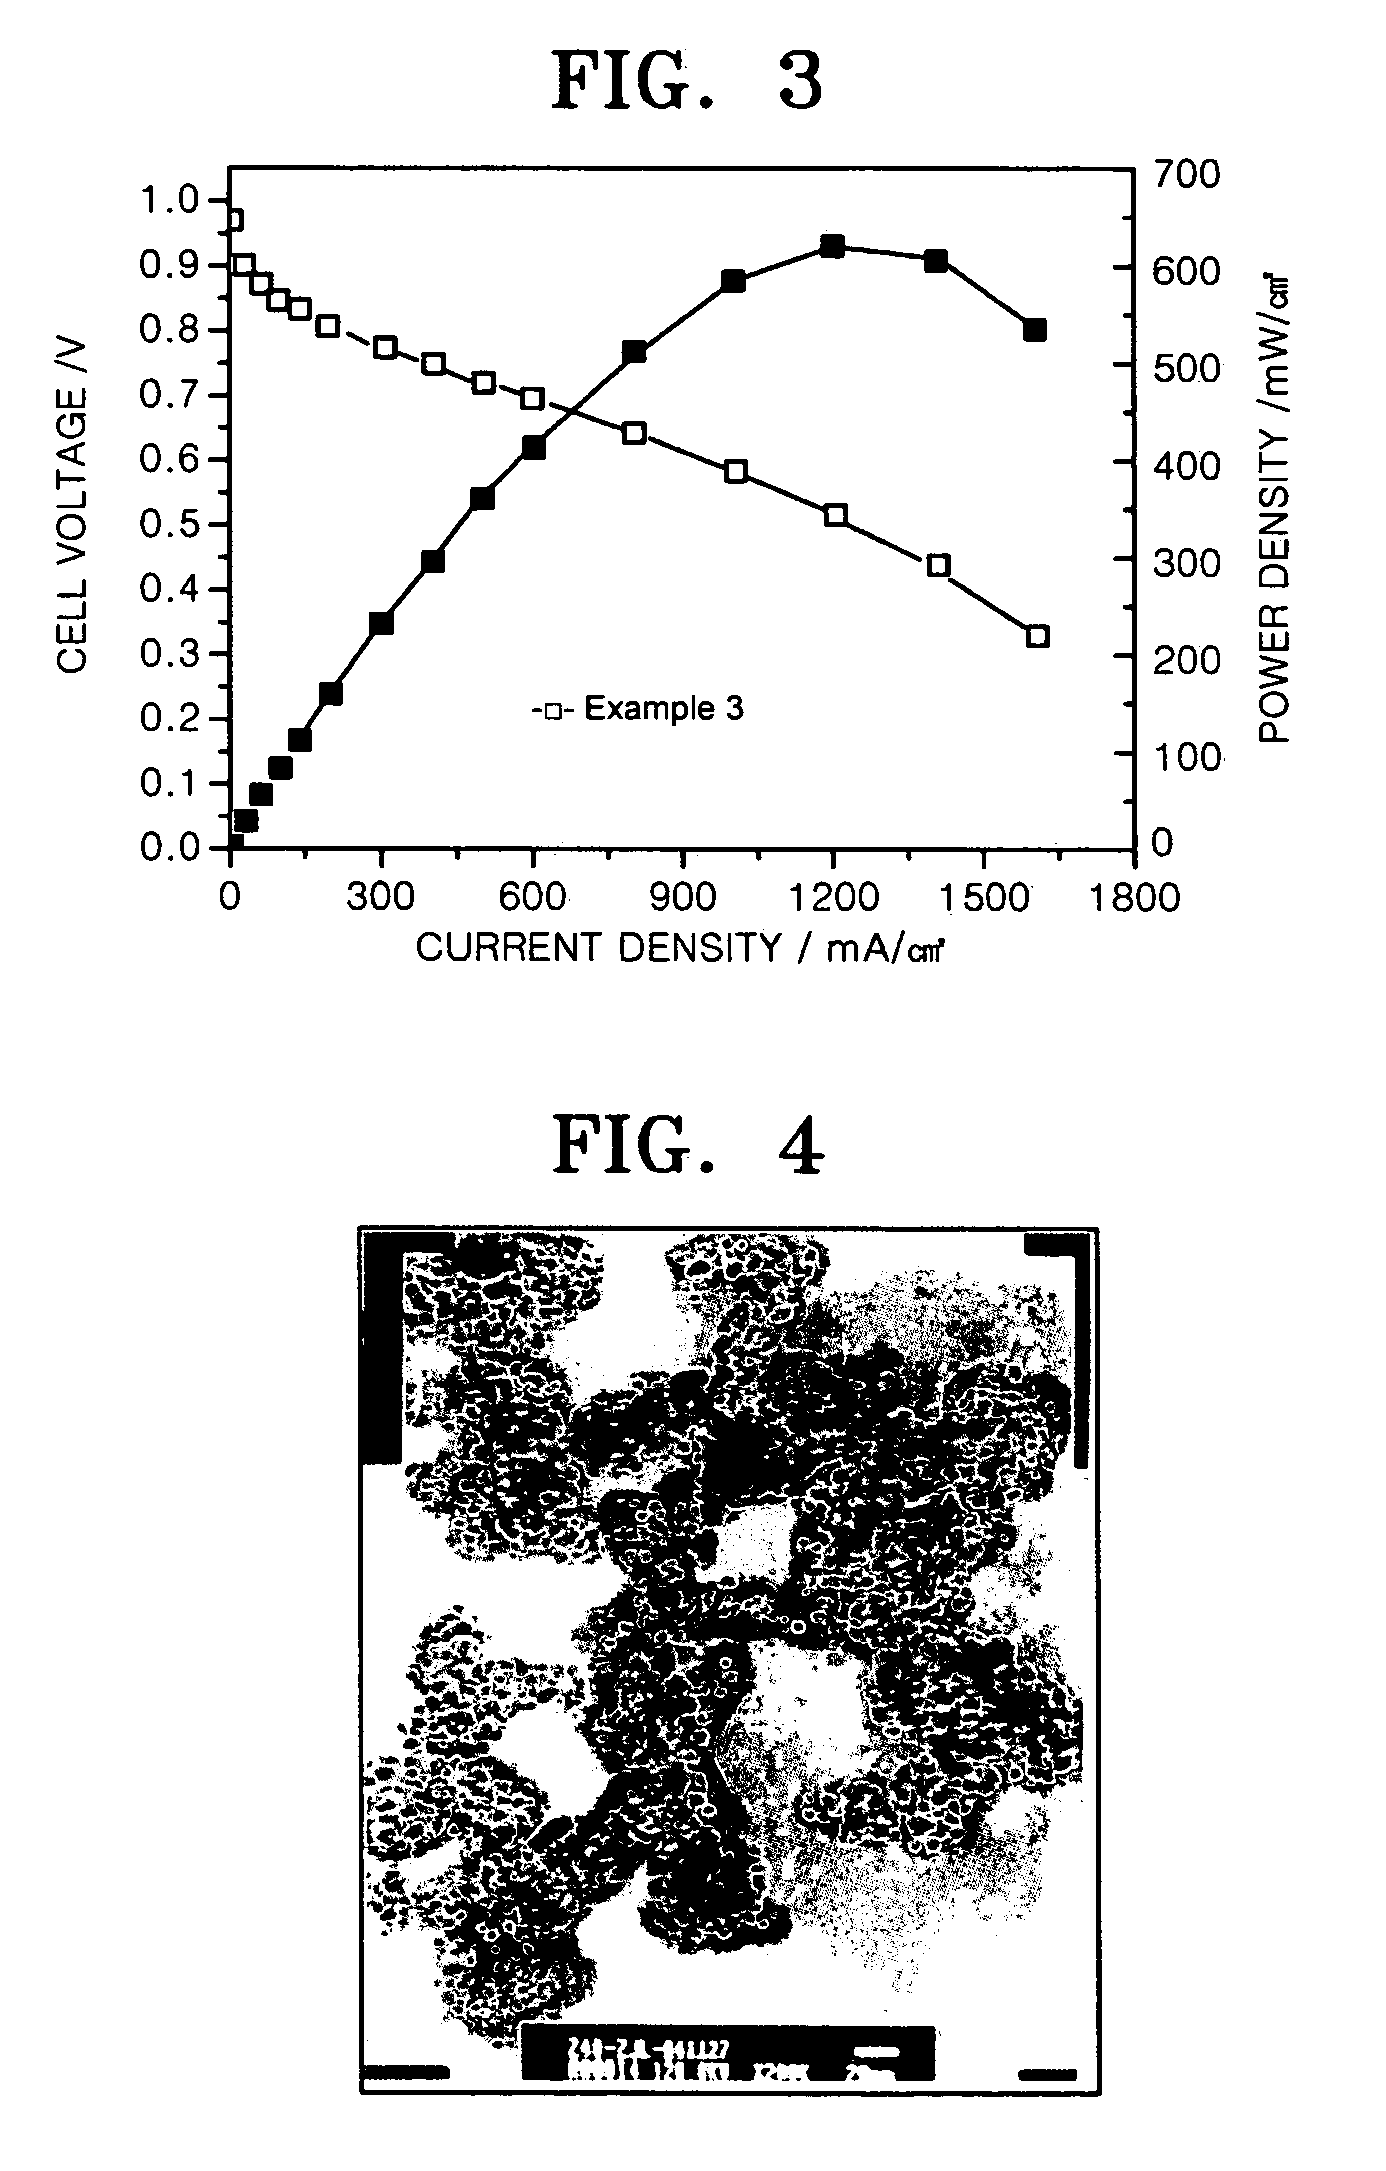 Carbon monoxide tolerant electrochemical catalyst for proton exchange membrane fuel cell and method of preparing the same